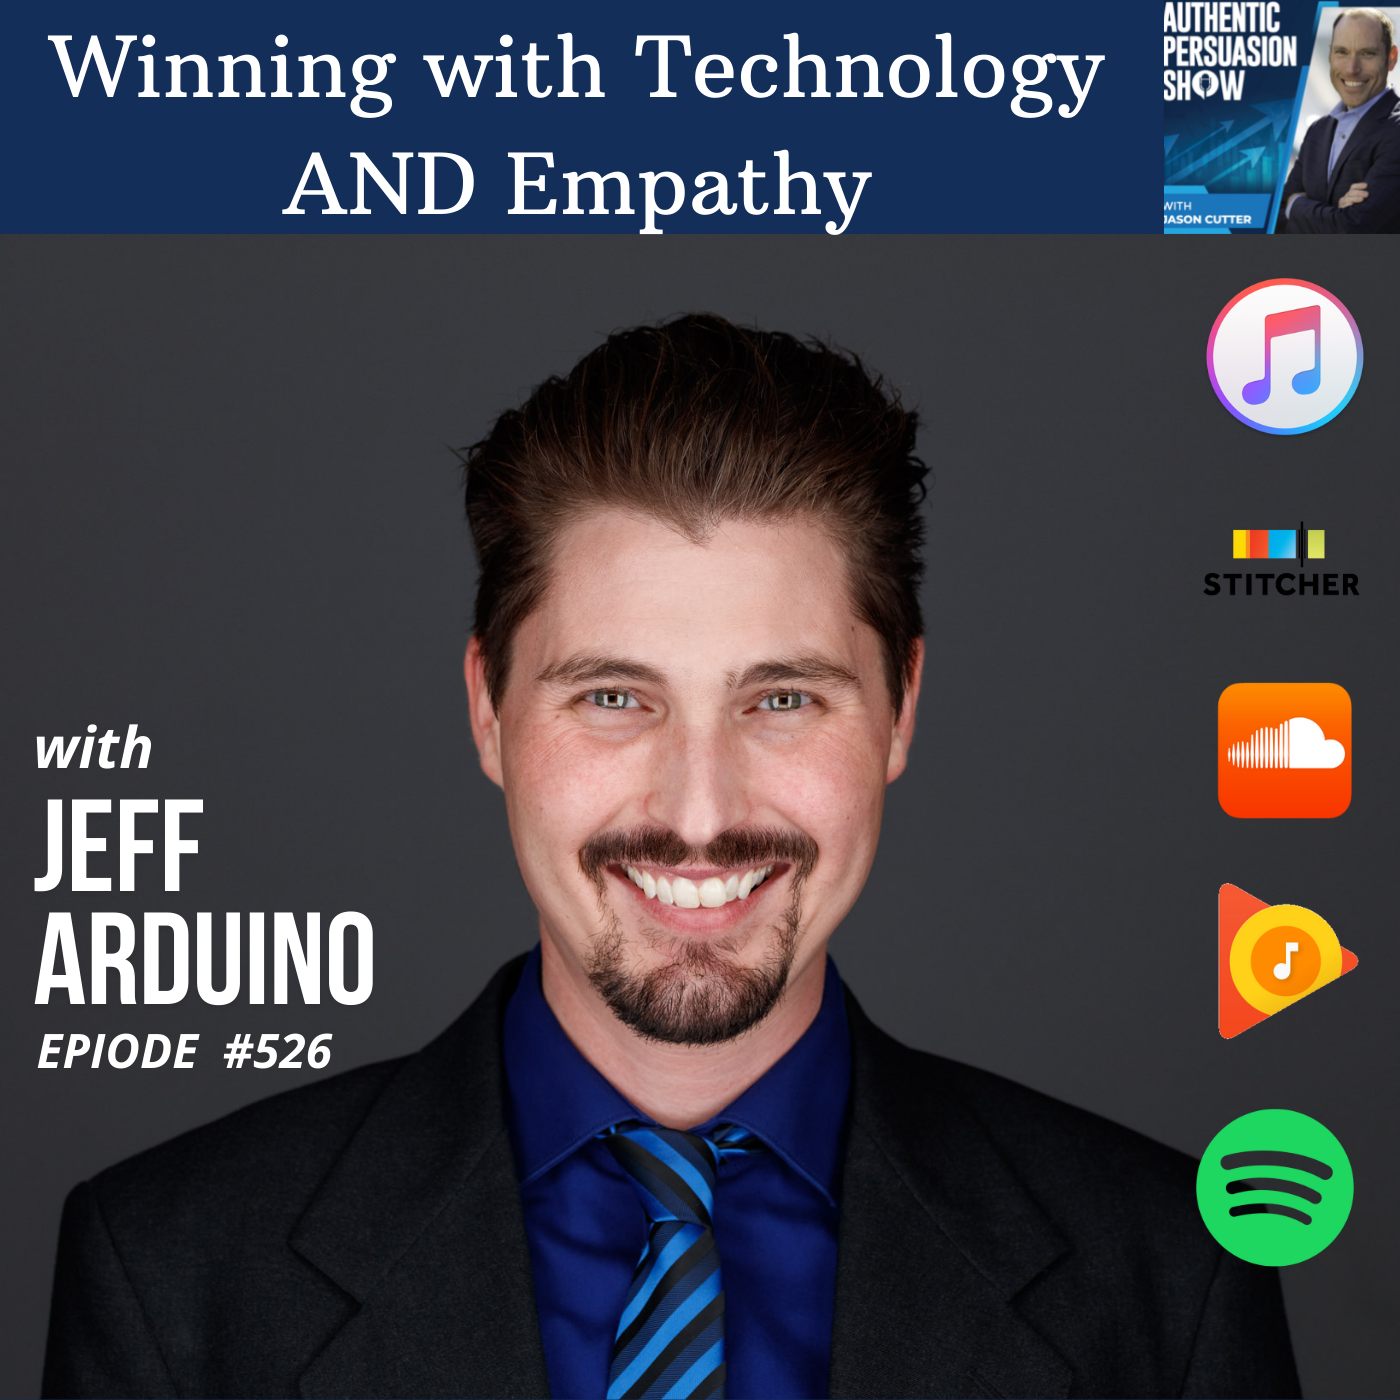 [526] Winning with Technology AND Empathy, with Jeff Arduino from Spectrum Retirement Communities